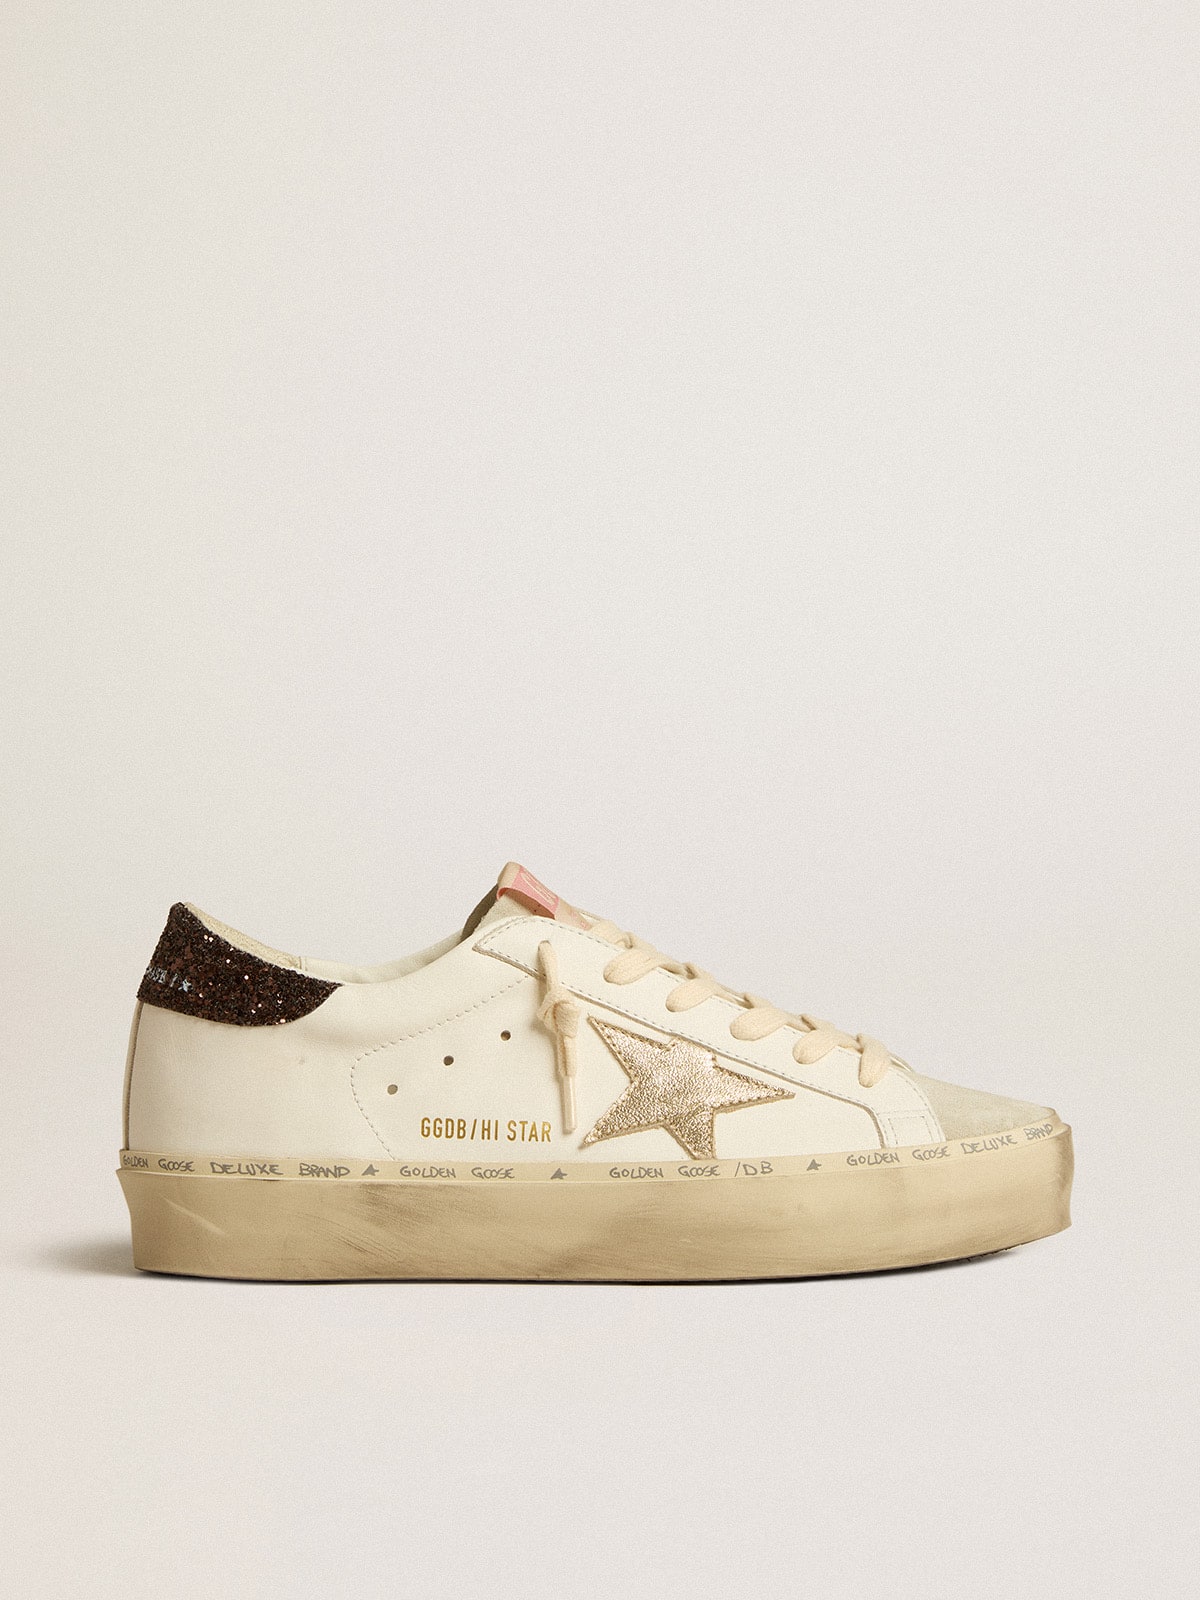 New Journey Collection | Golden Goose